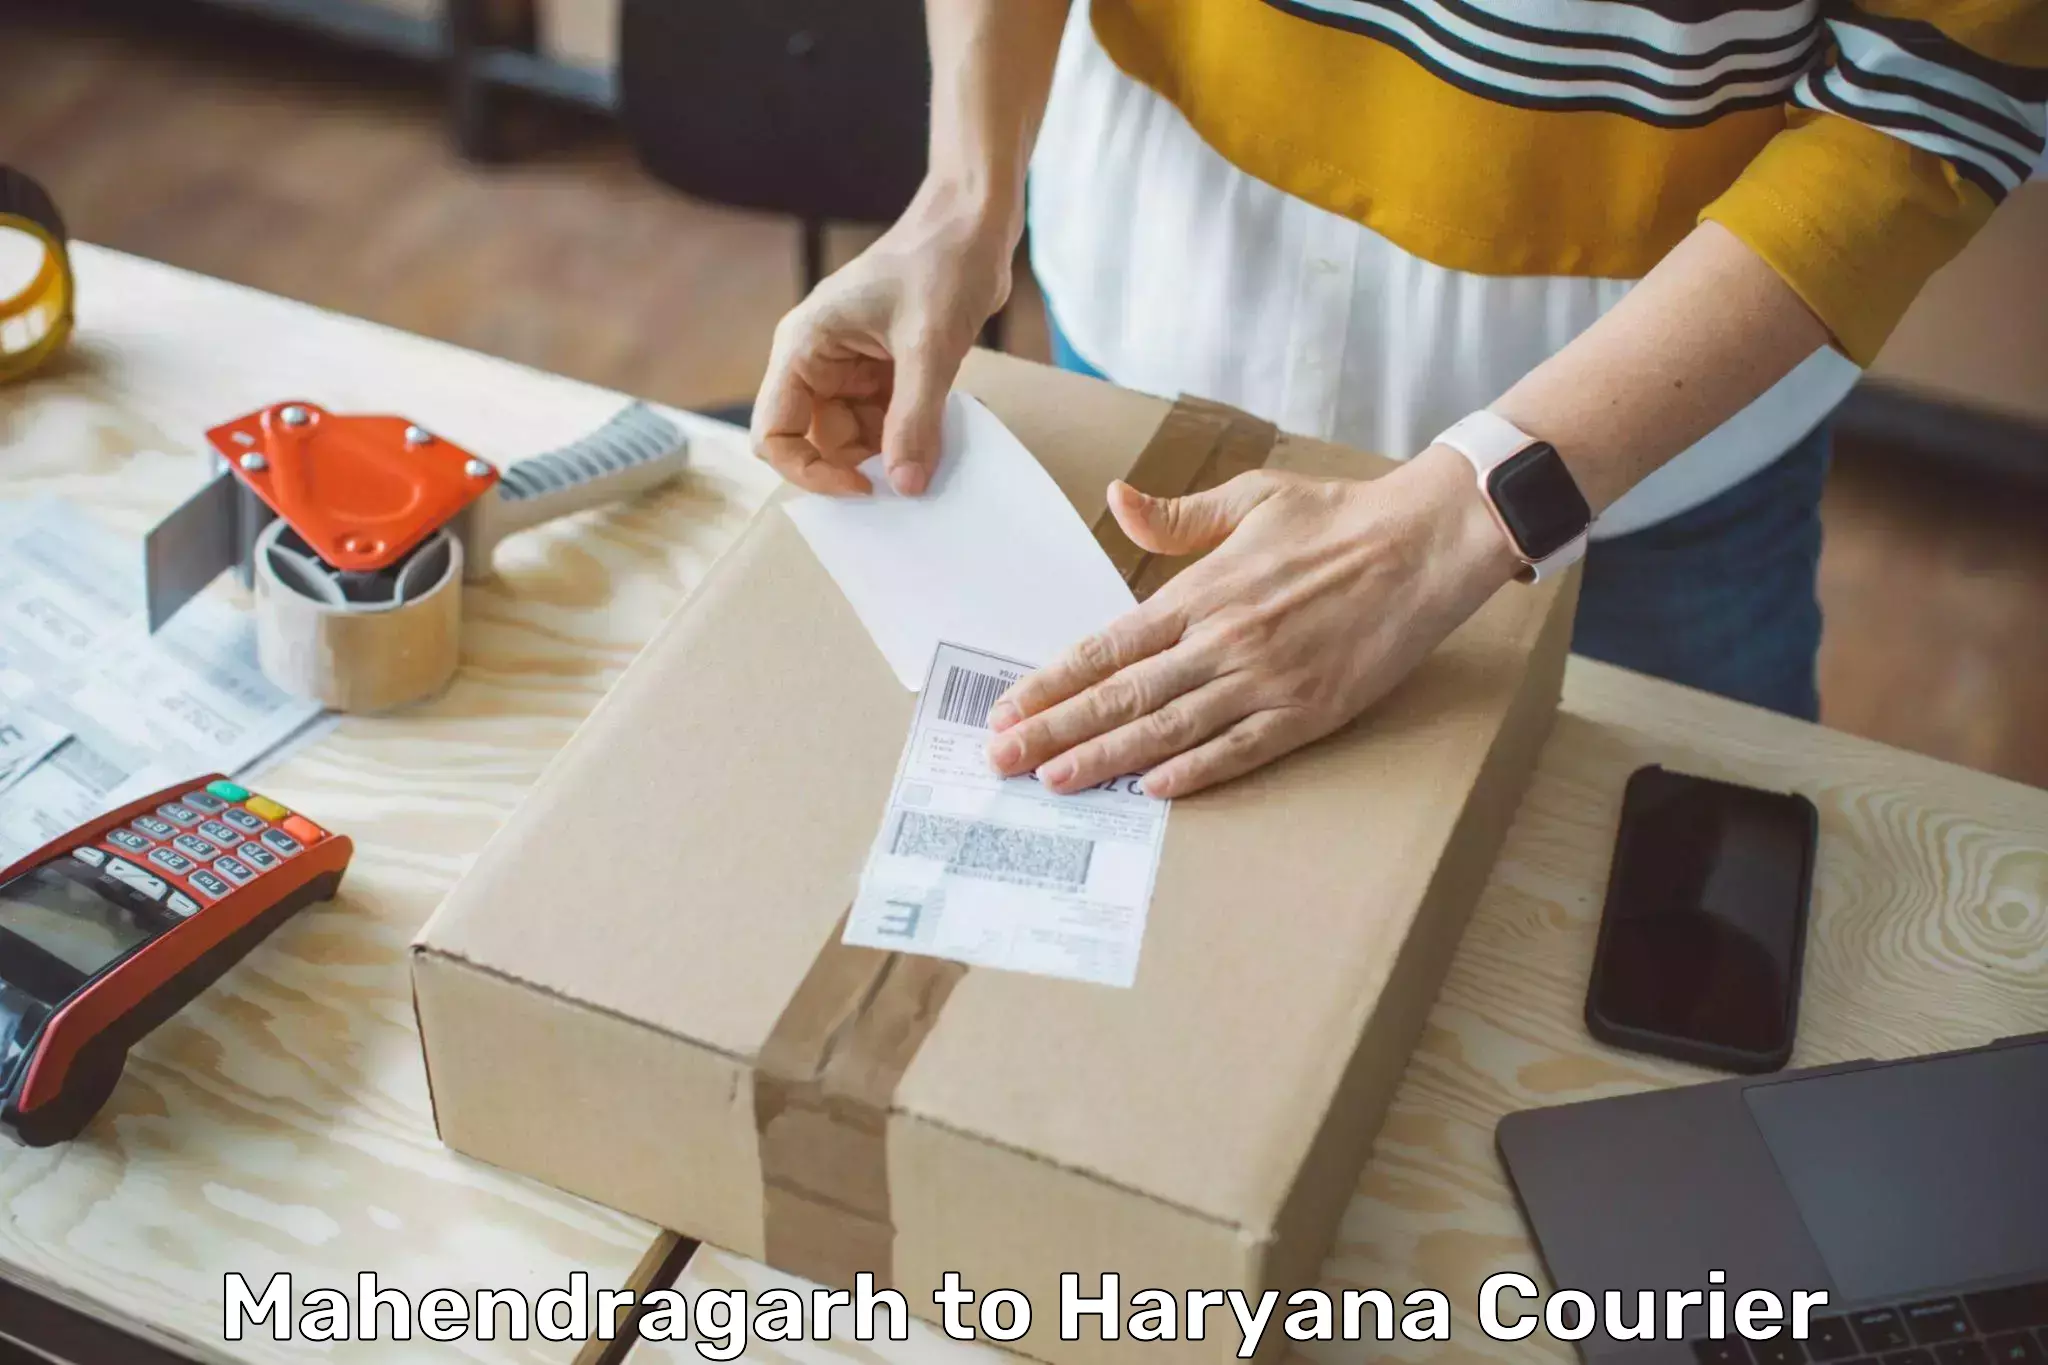 High-quality delivery services Mahendragarh to NCR Haryana